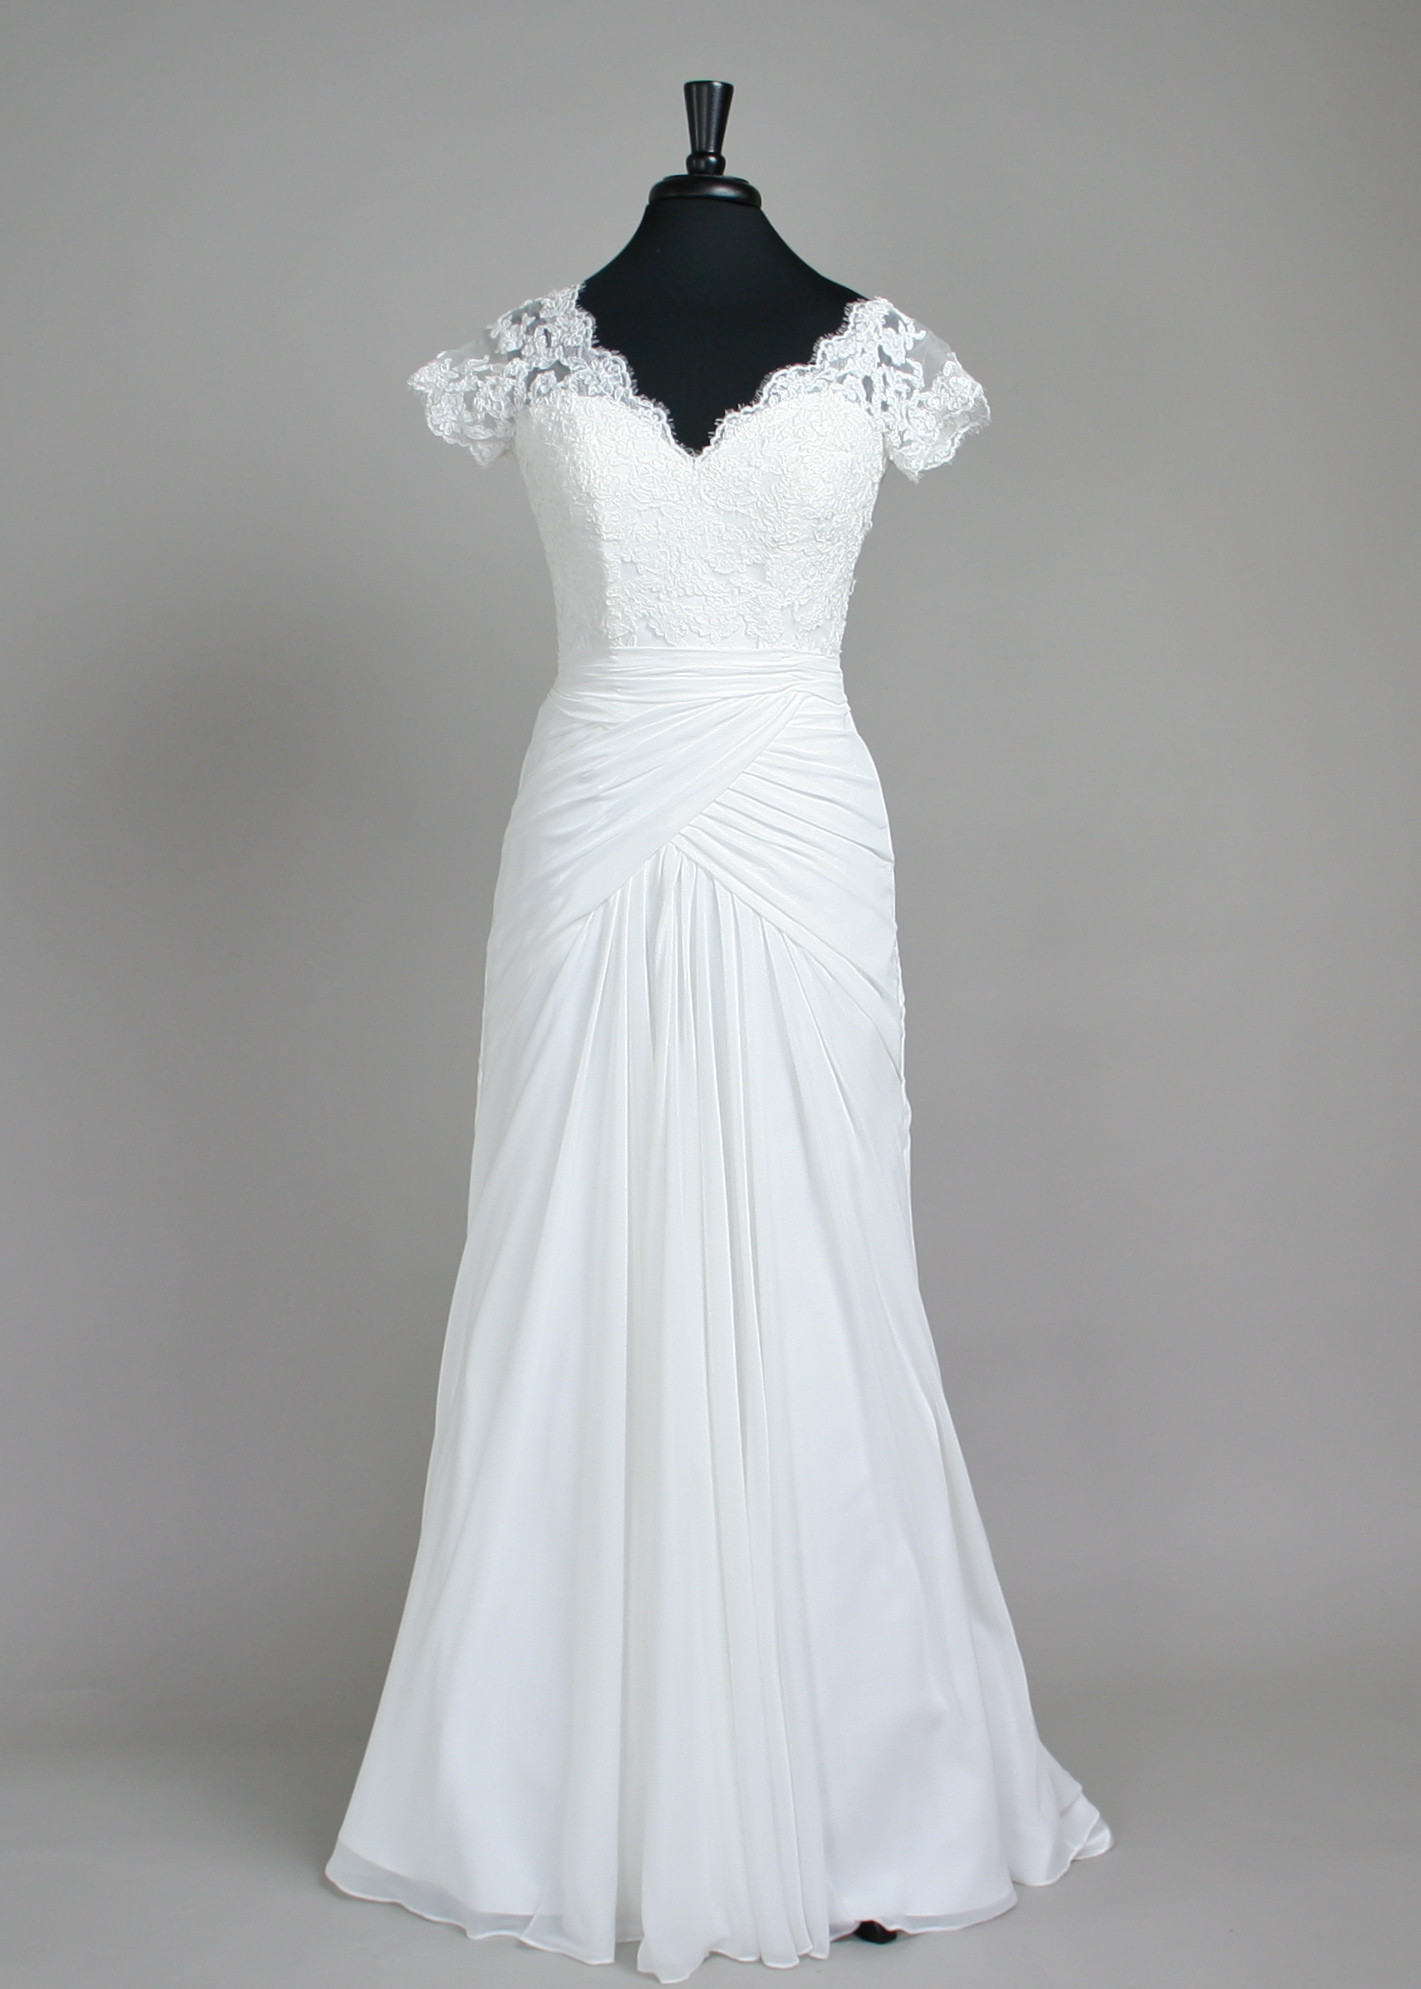 Wedding Dresses Knoxville Tn
 Places To Buy Wedding Dresses In Knoxville Tn